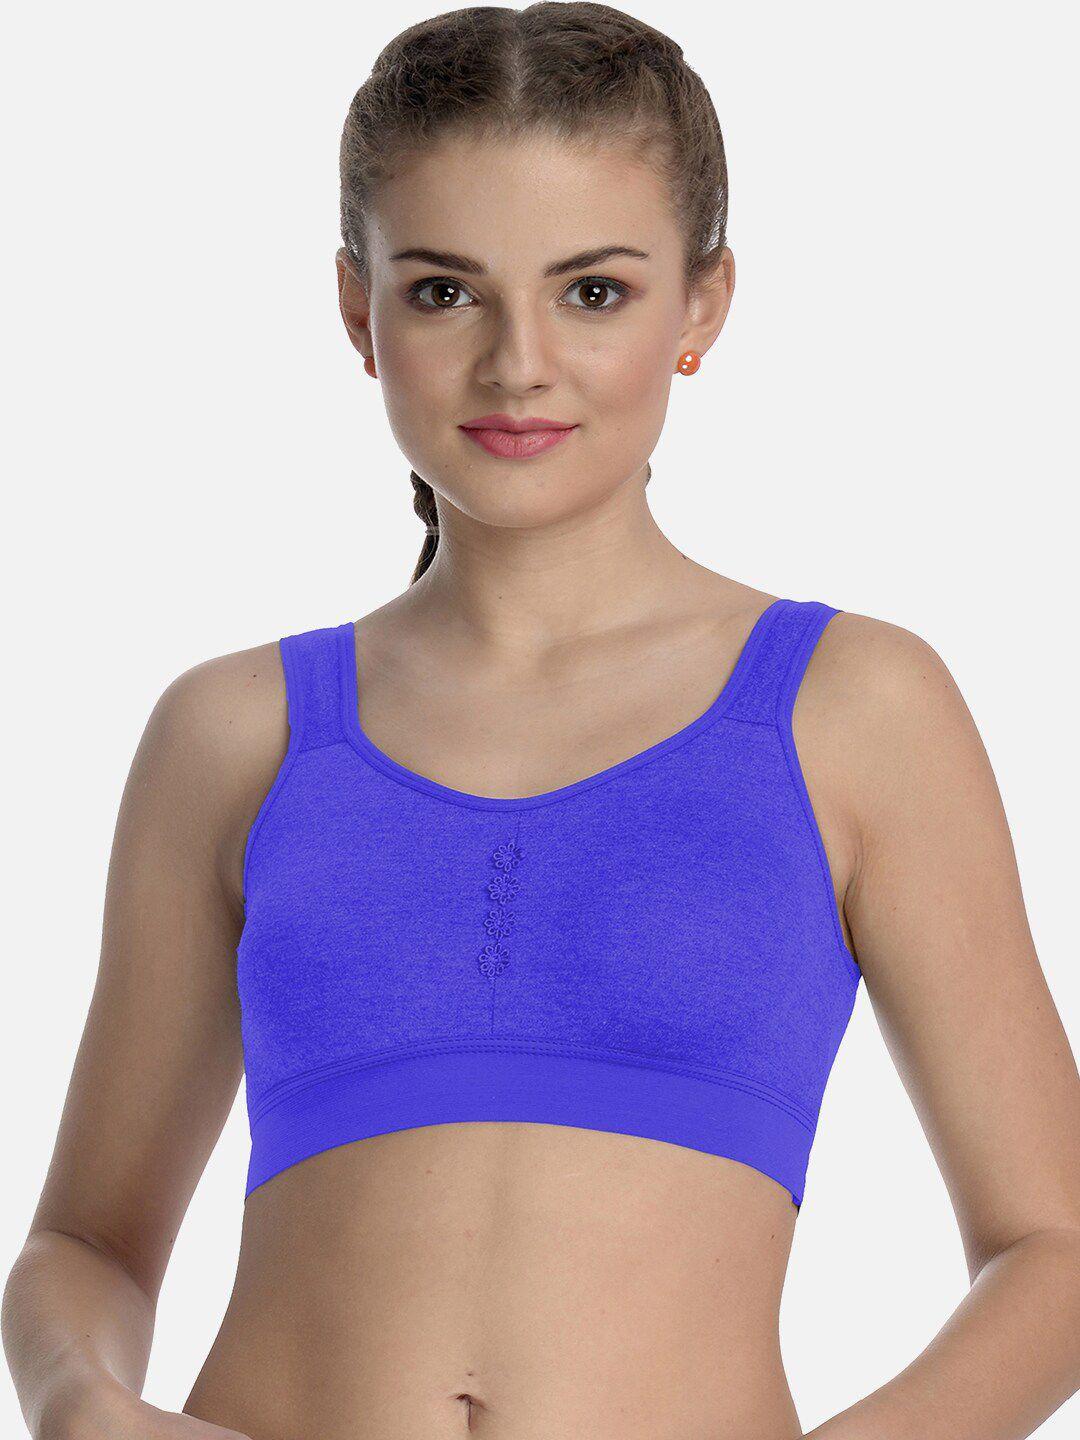 fims dry-fit non-padded full coverage cotton sports bra